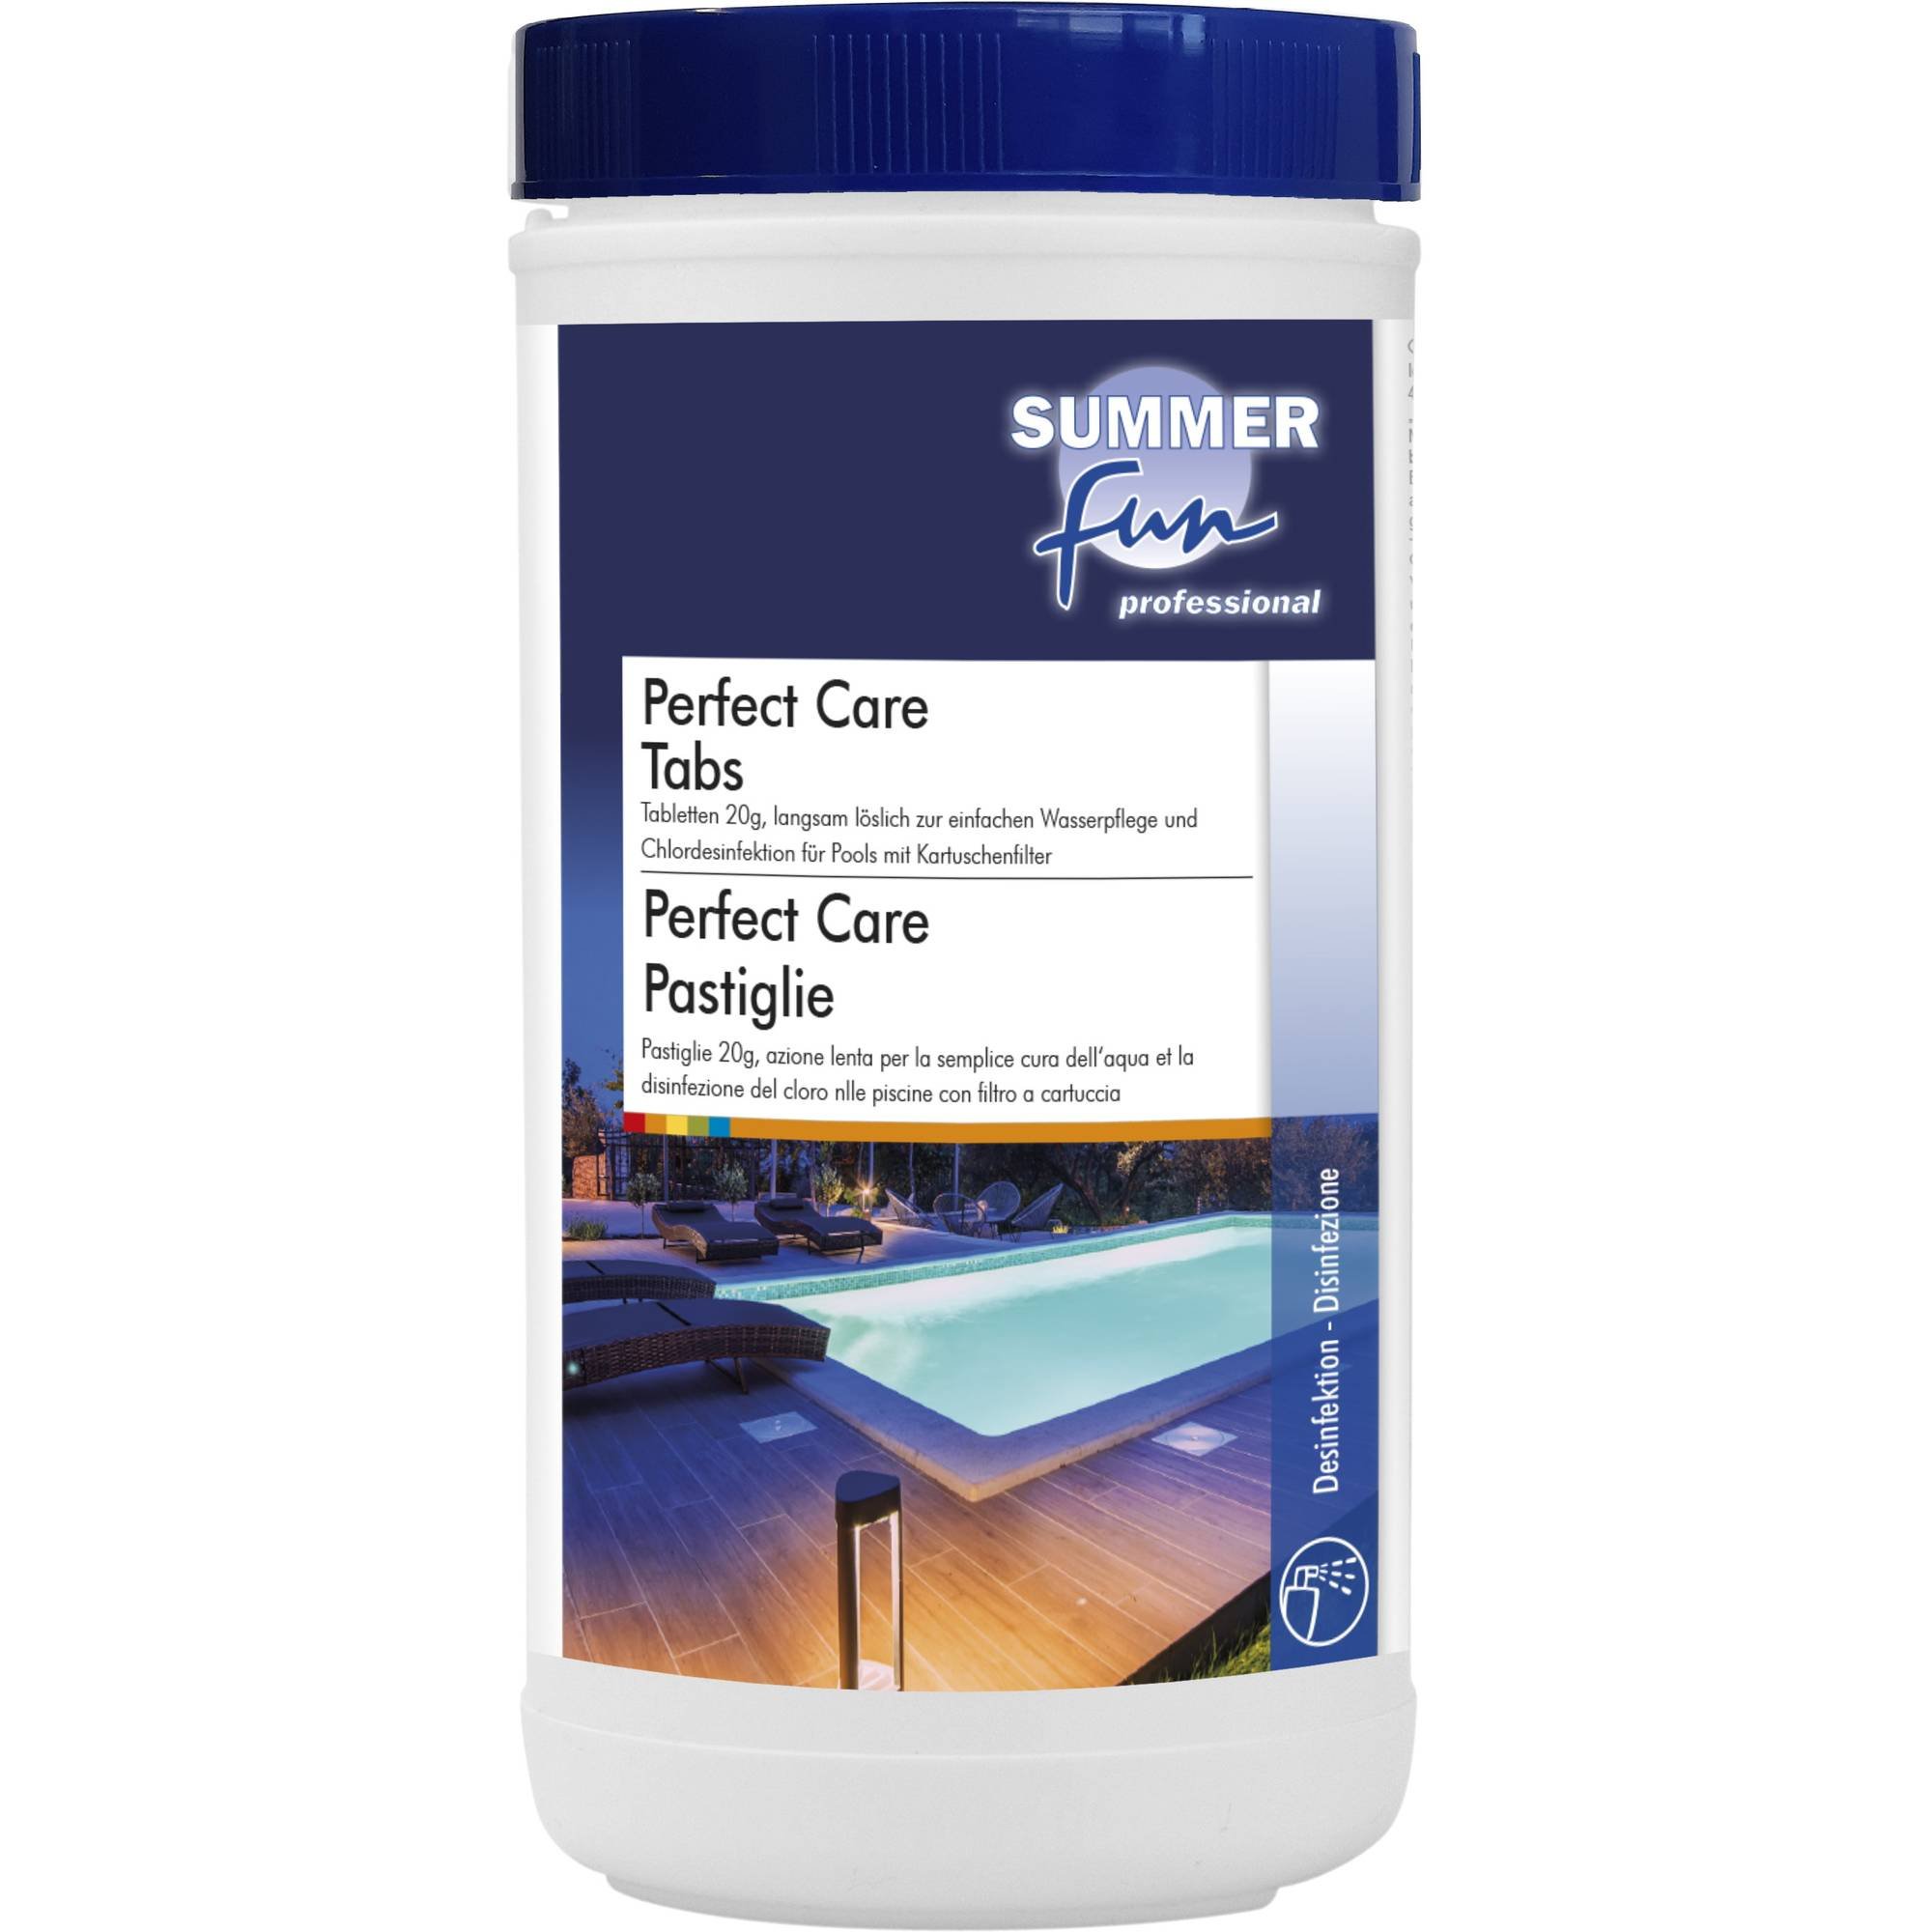 Summer Fun - Perfect Care Tabs - 20g Tabletten, 1 kg